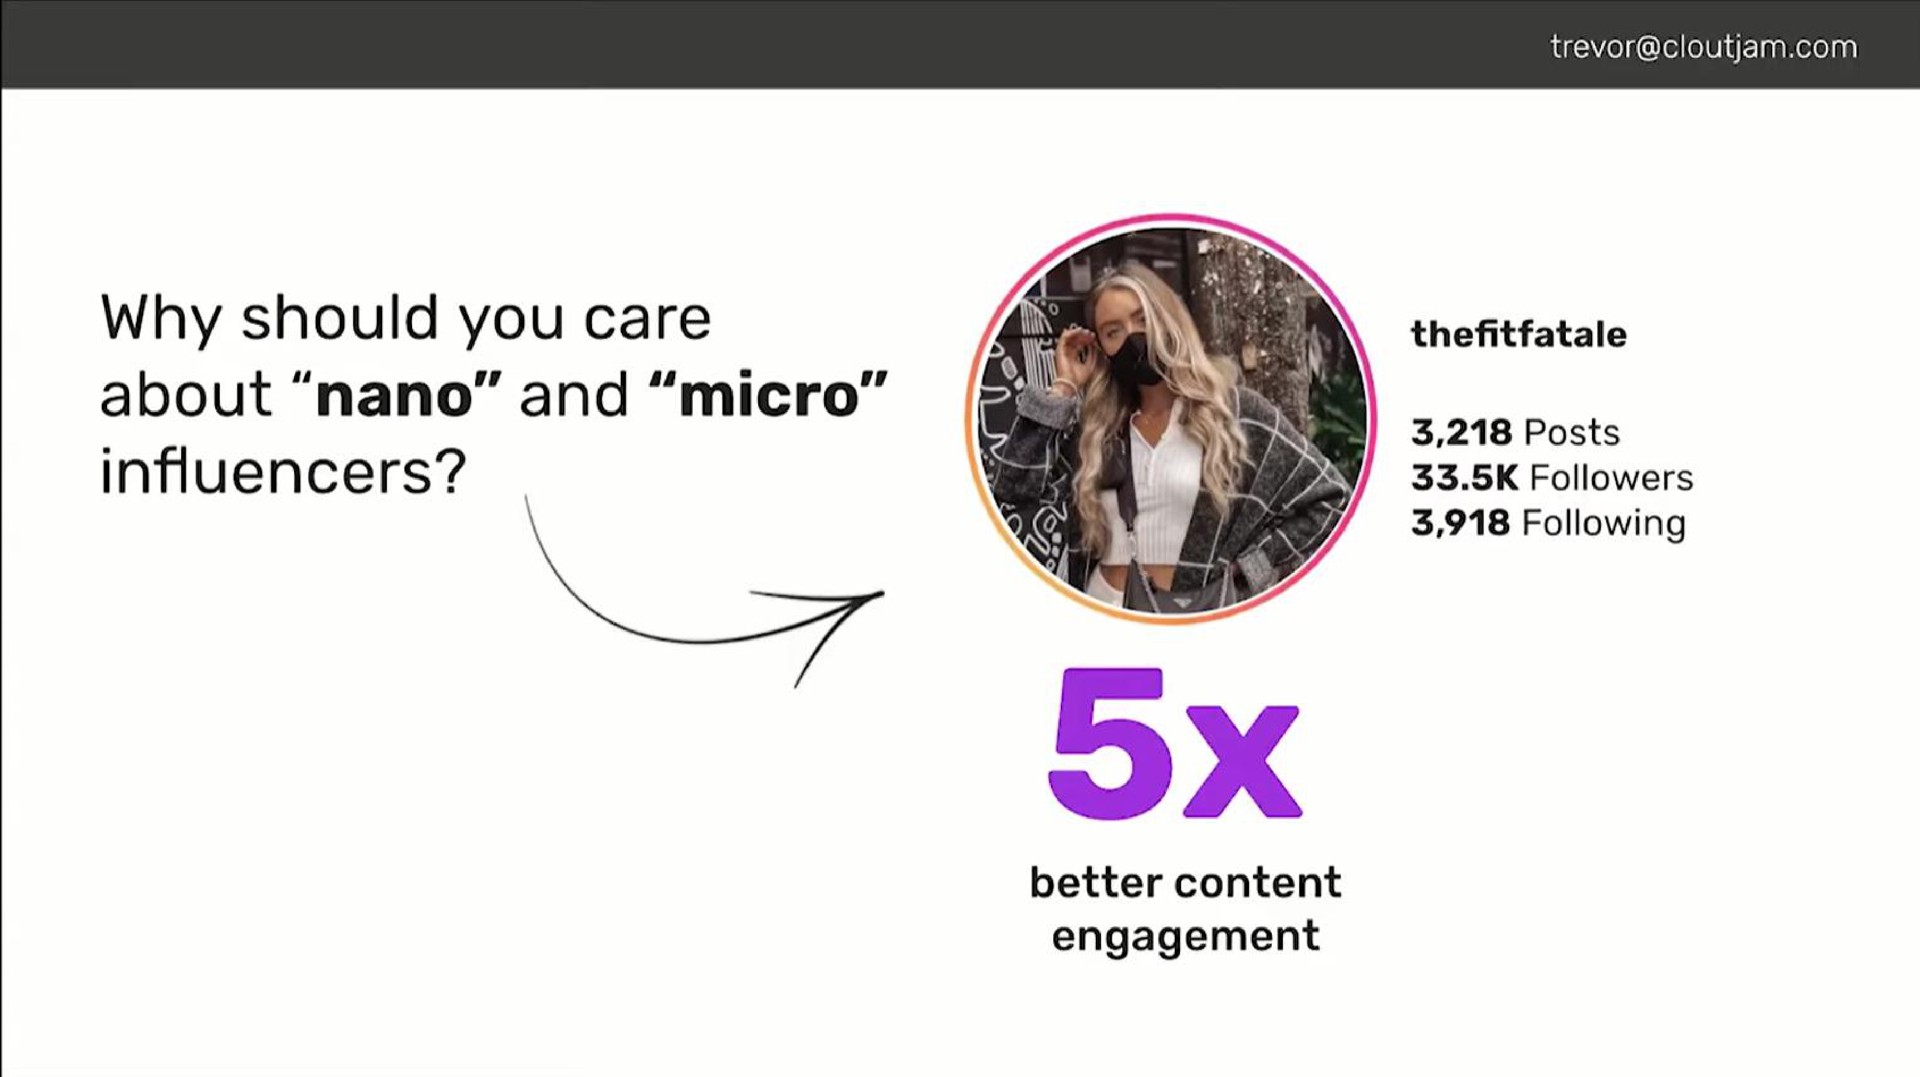 why should you care about and micro posts followers following better content engagement | Clout Jam